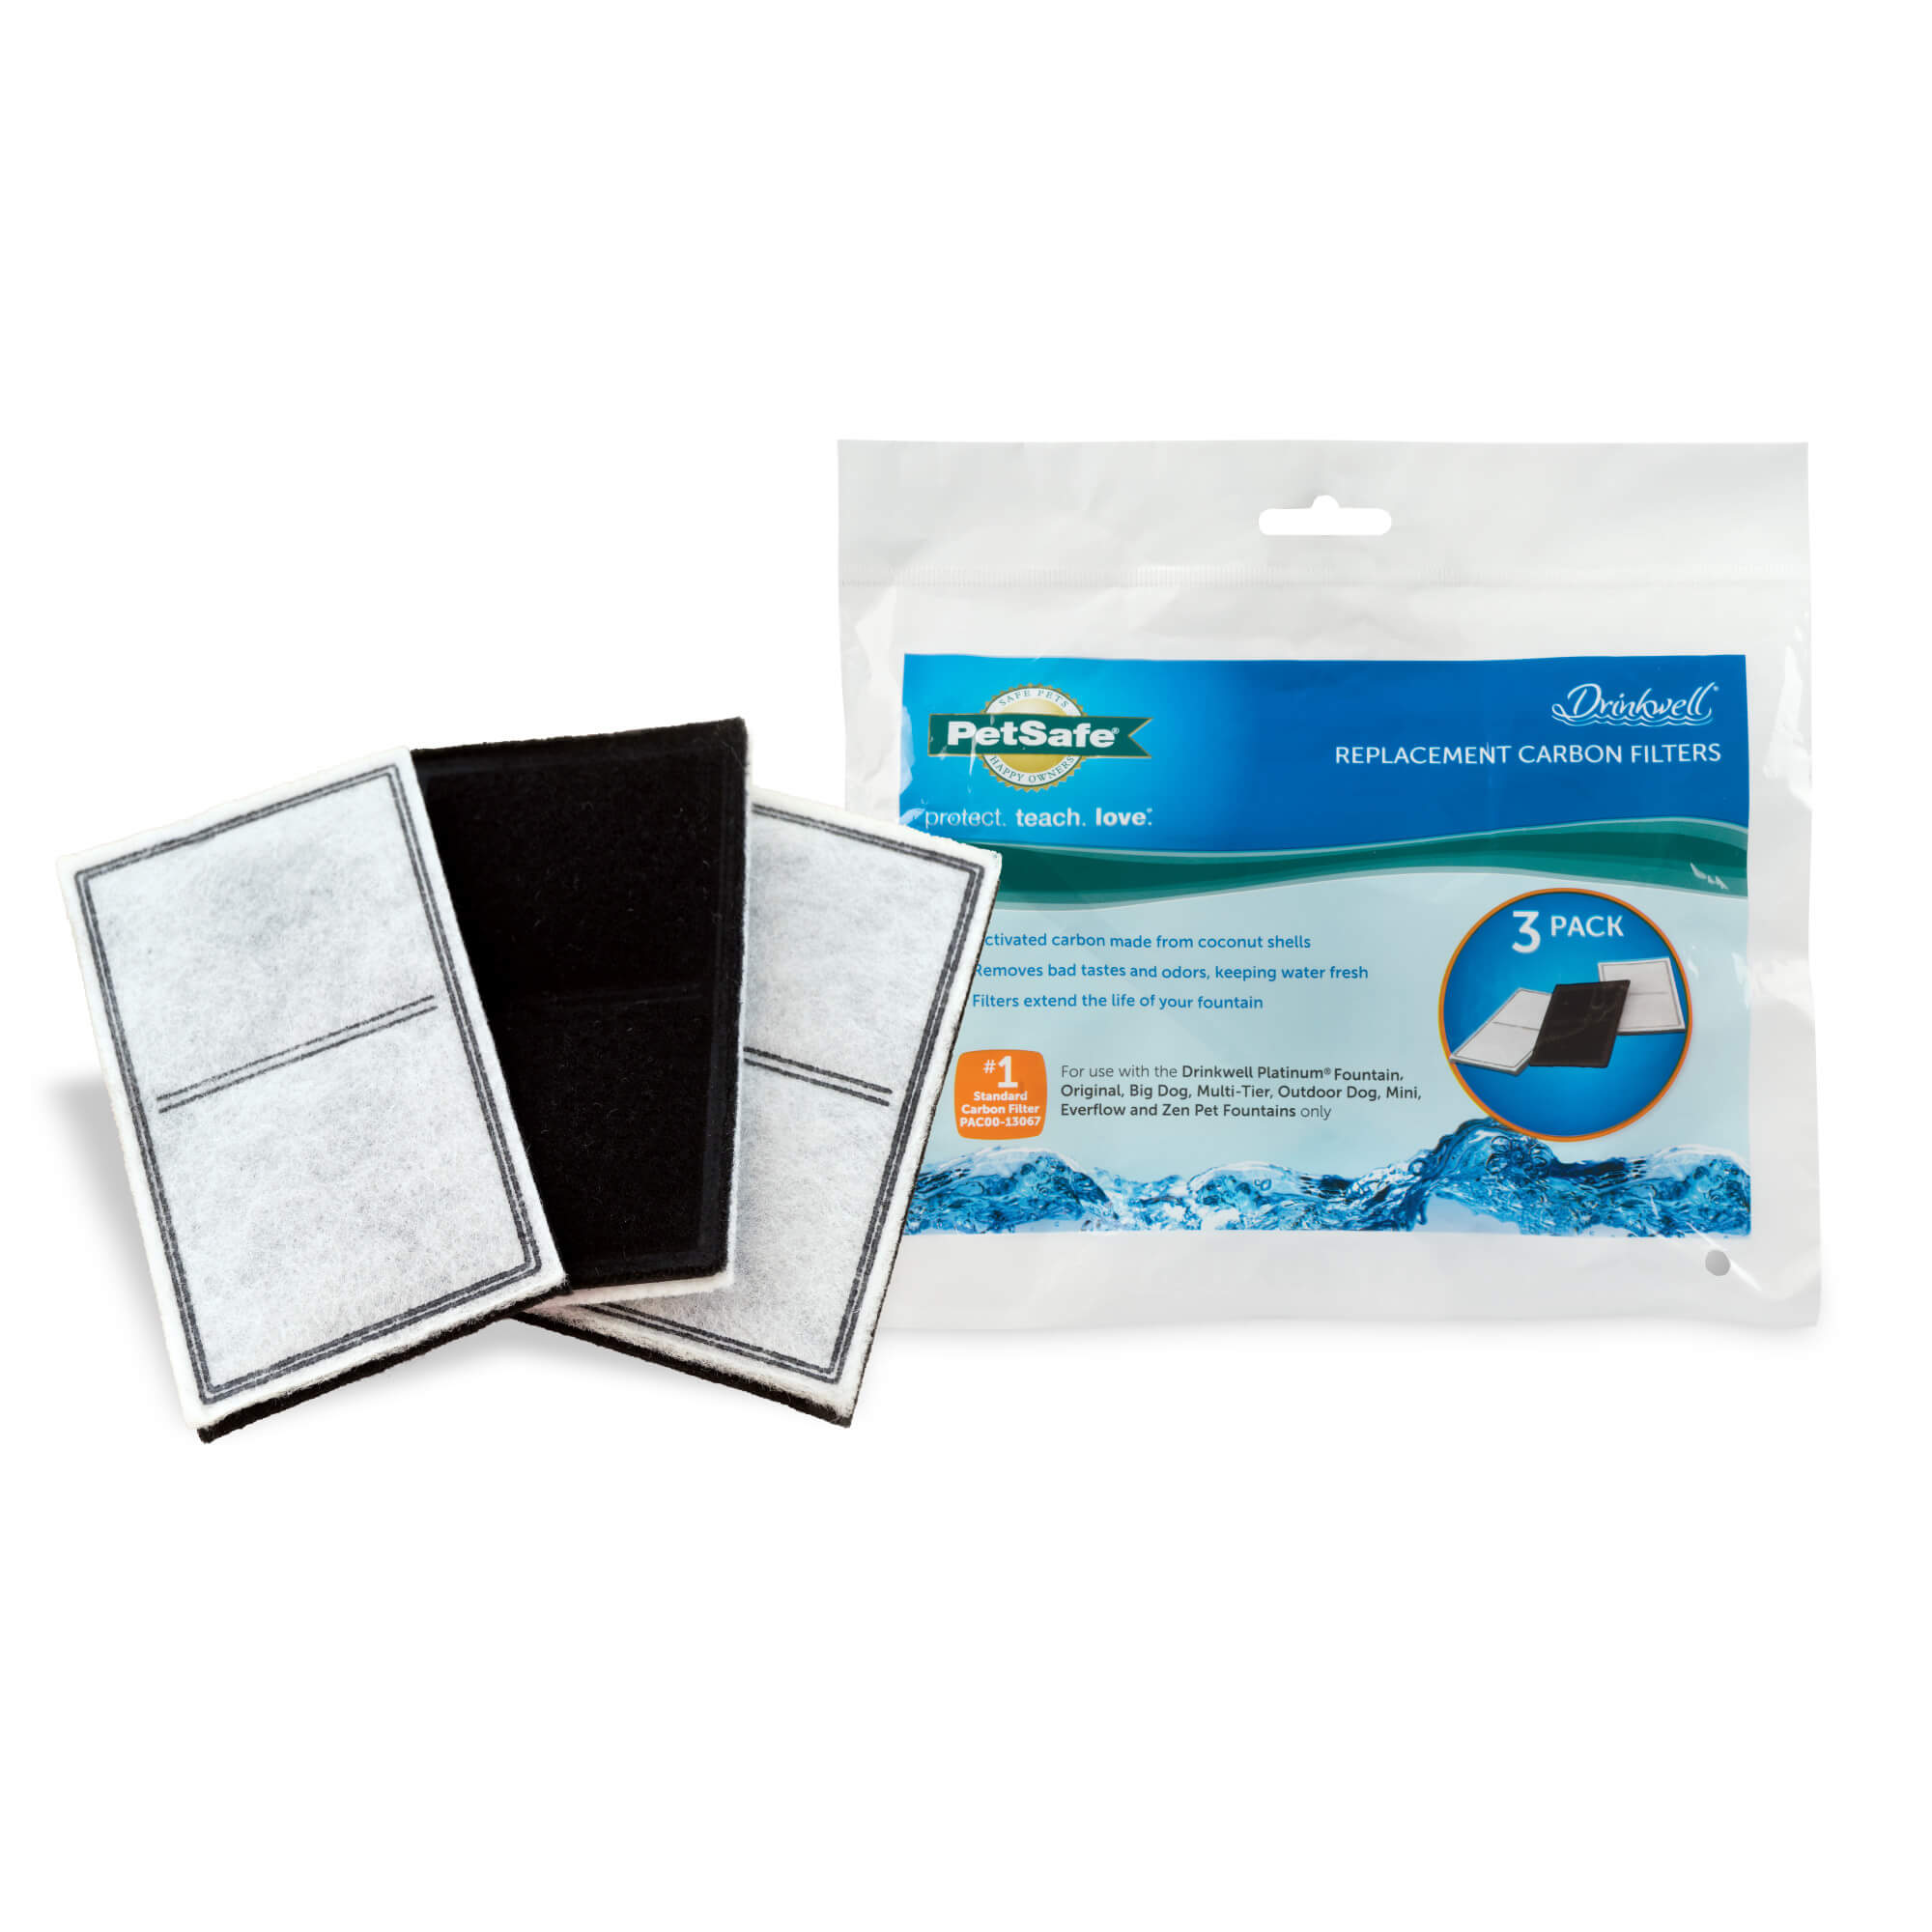 Drinkwell activated carbon replacement filter